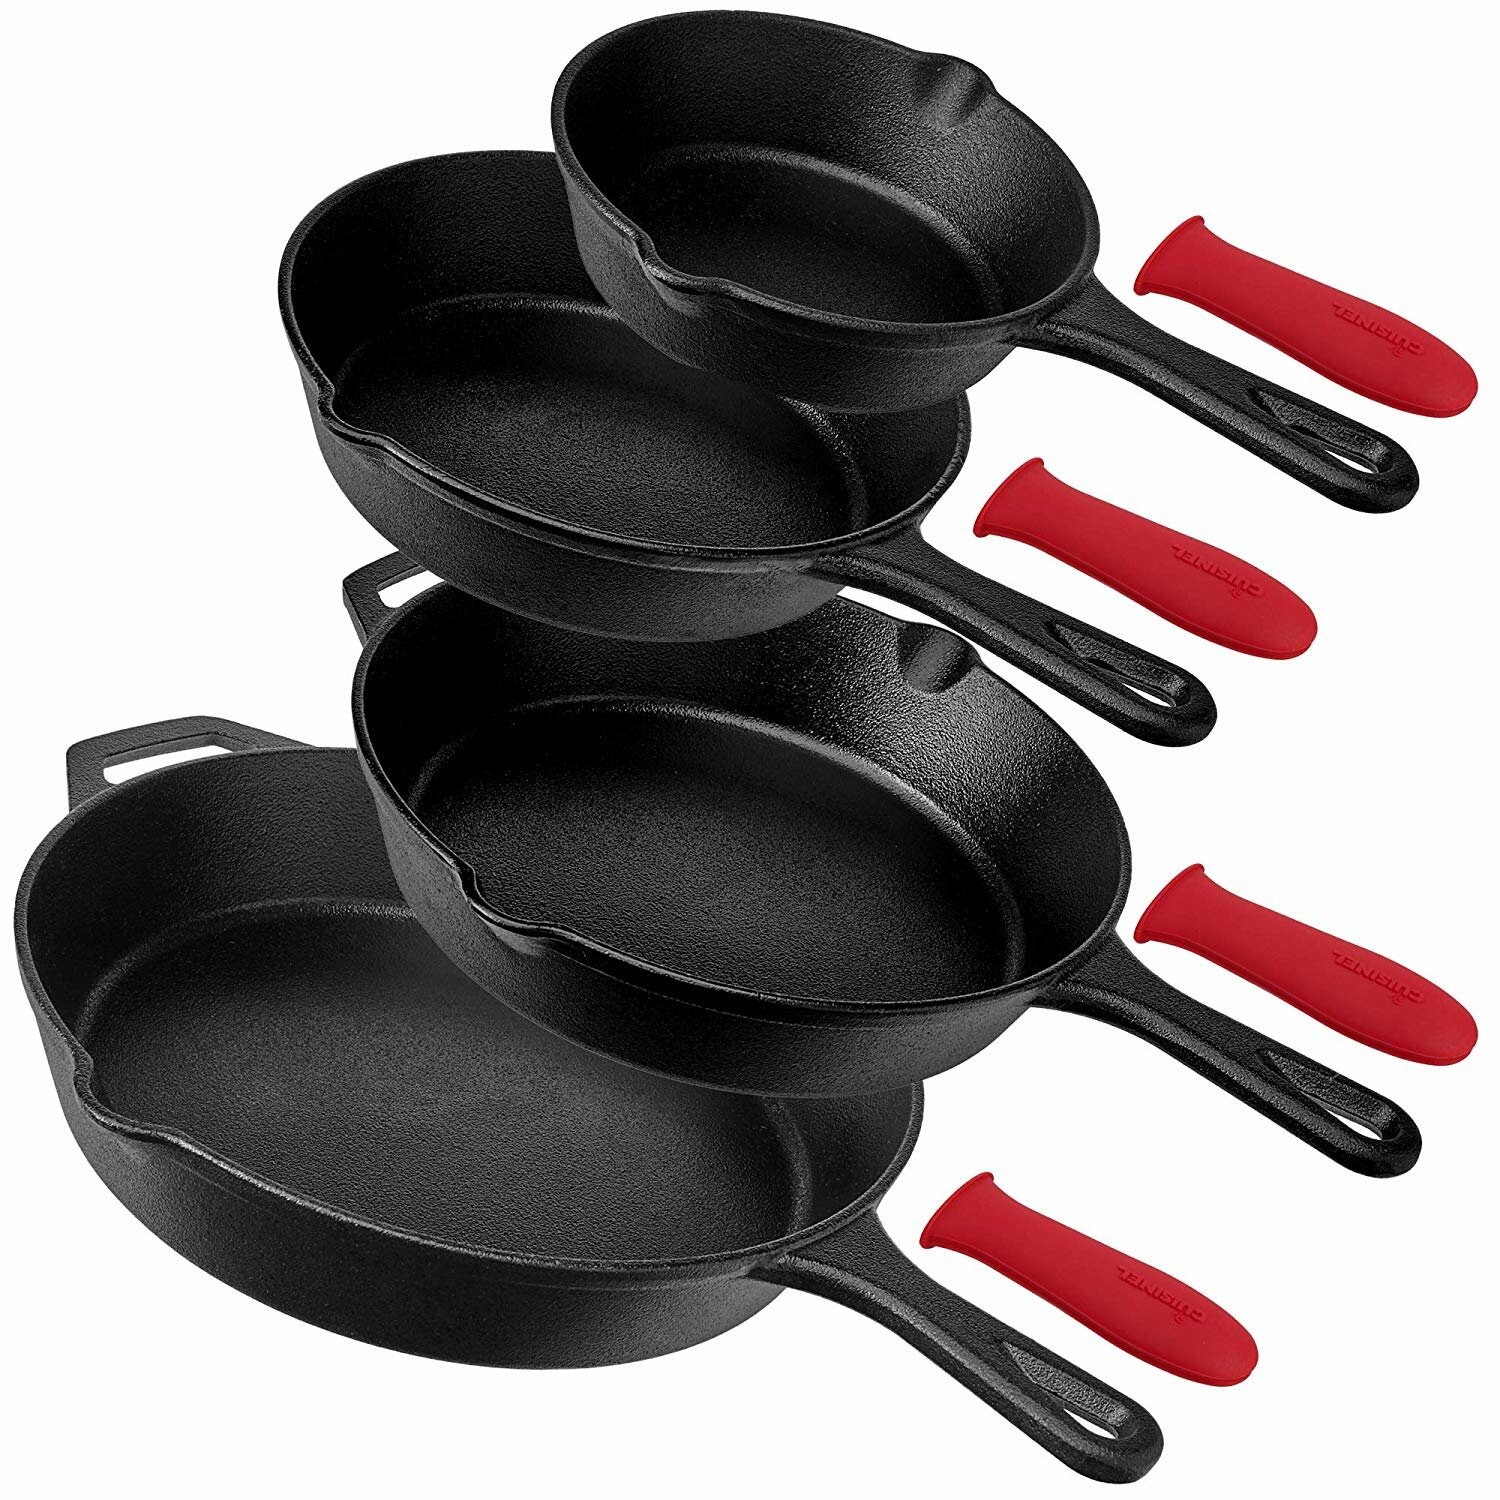 3 CAST IRON SKILLET Pre Seasoned 6 8 10 Inch Stove Oven Fry Pans Cookware Set 